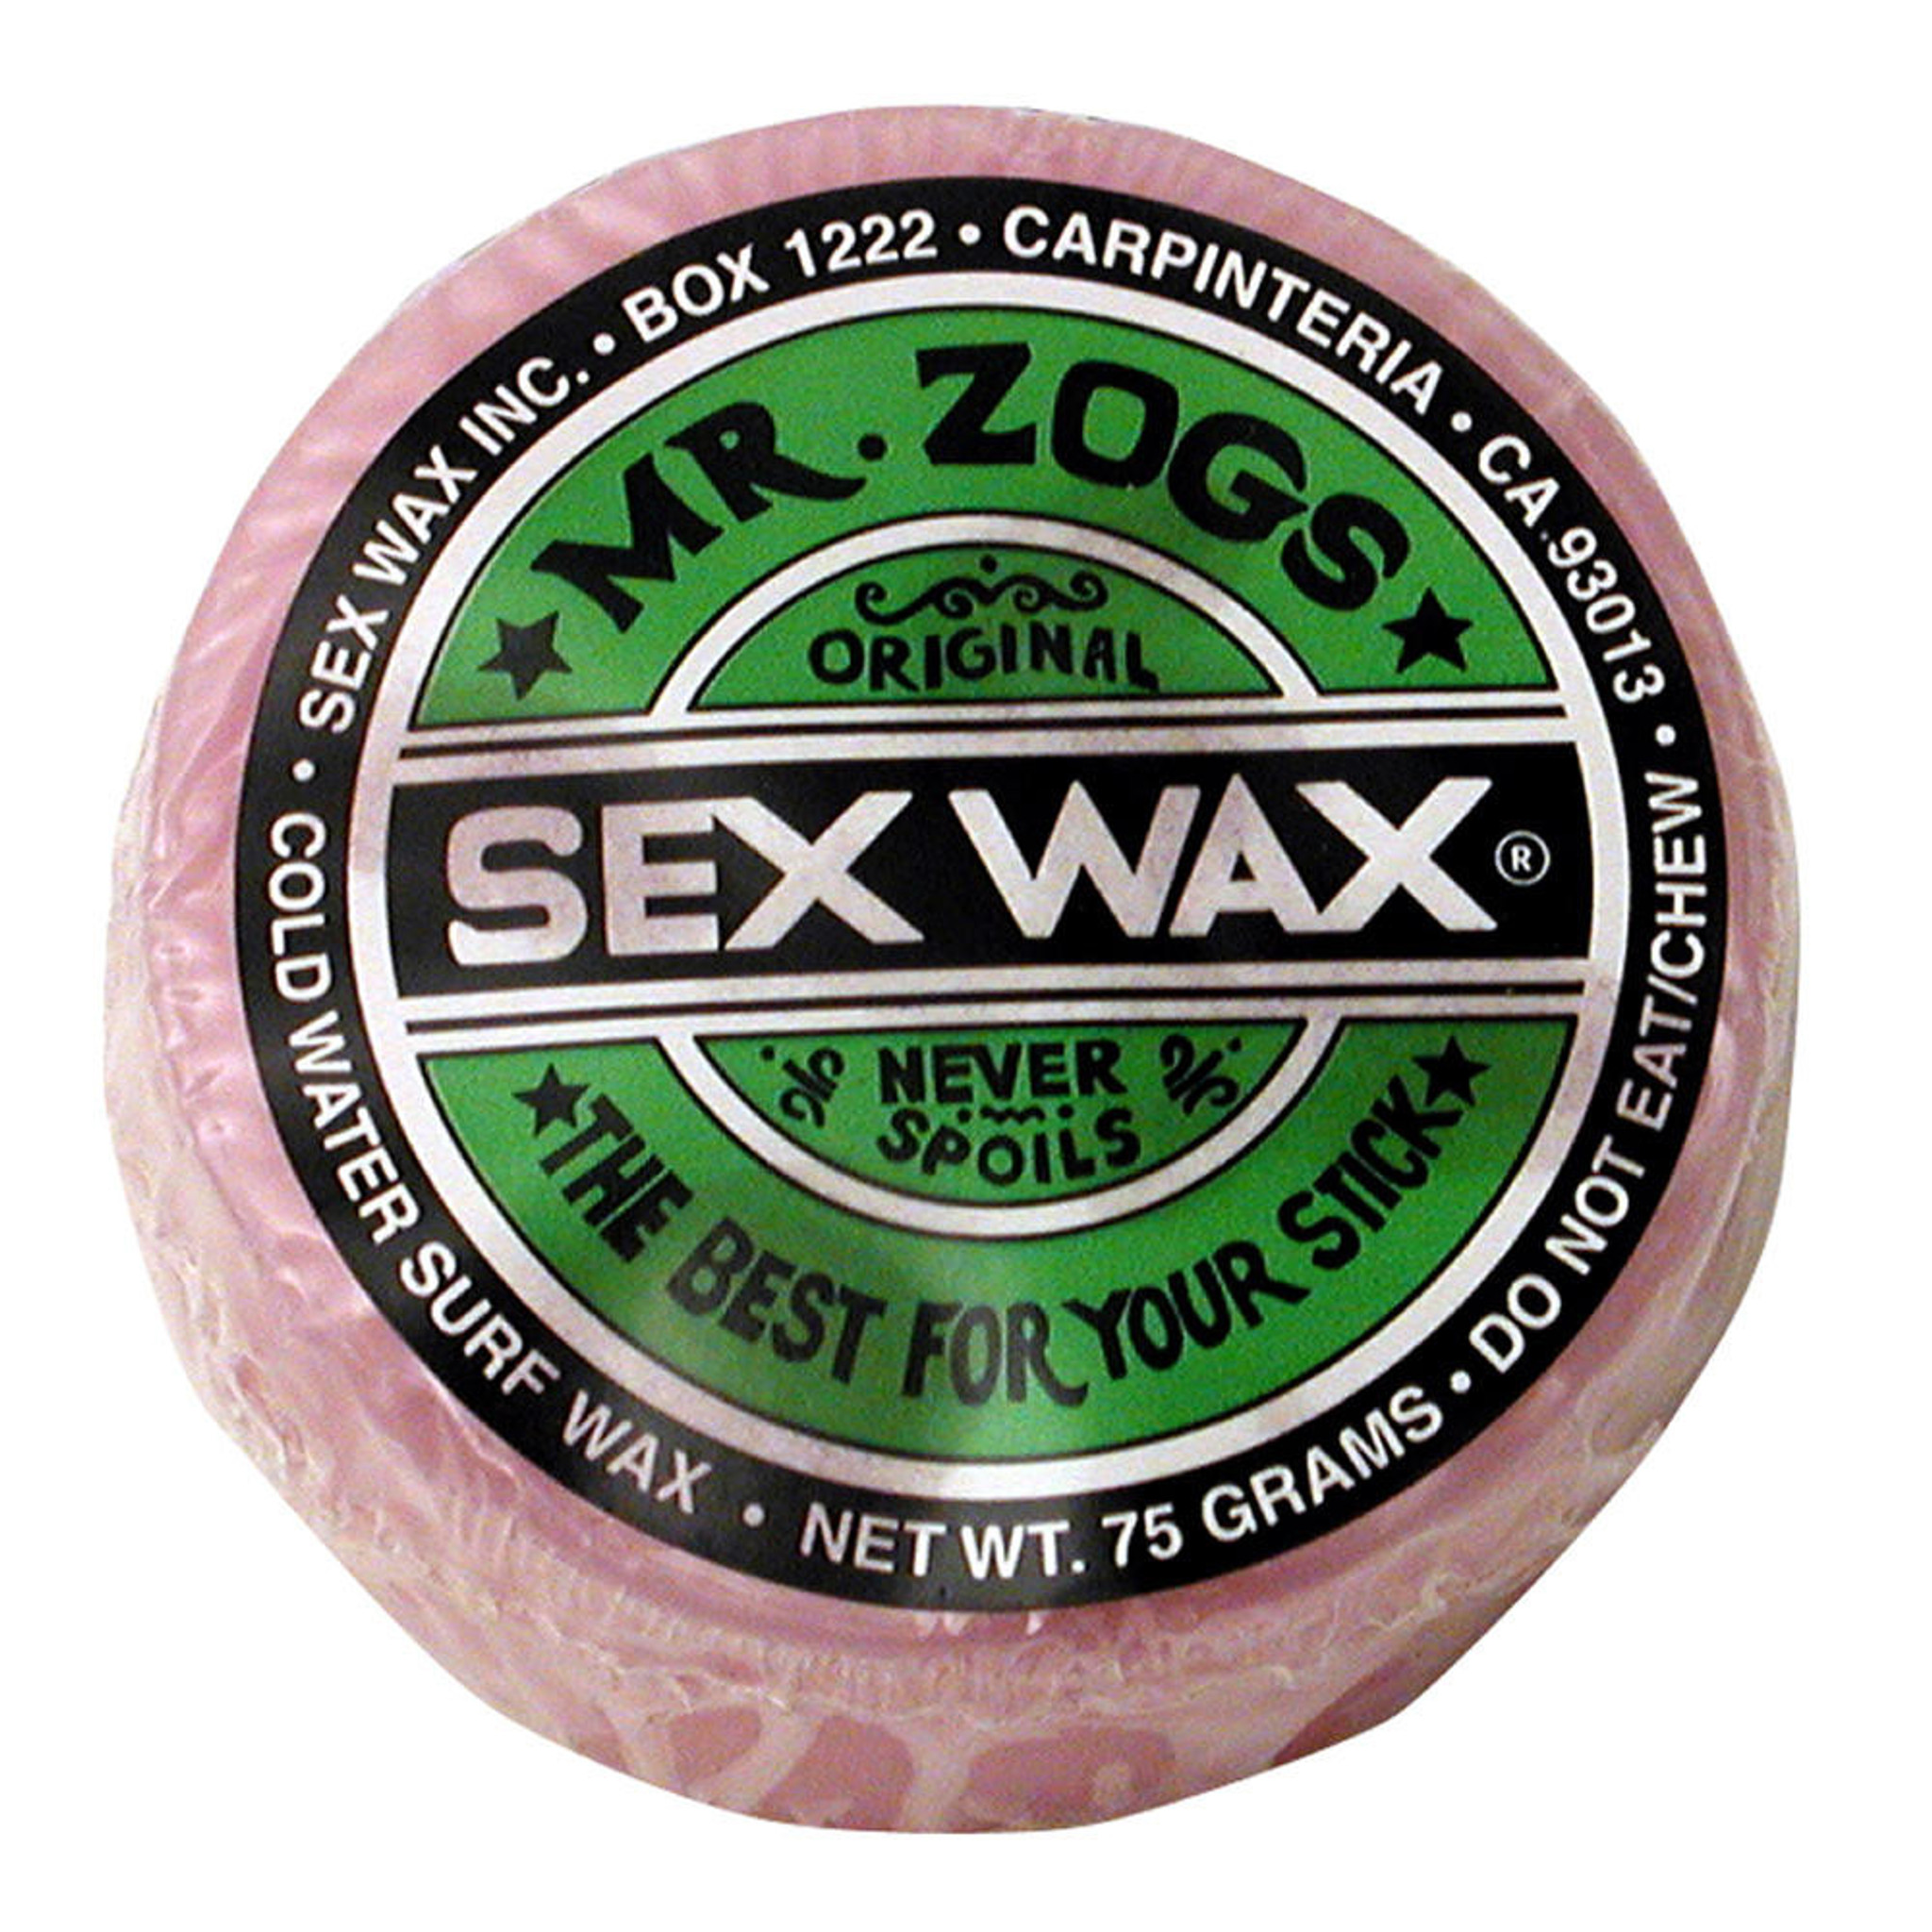 Zipper-Ease Lubricant Wax Stick for Surfers Snorkels and Scuba Divers